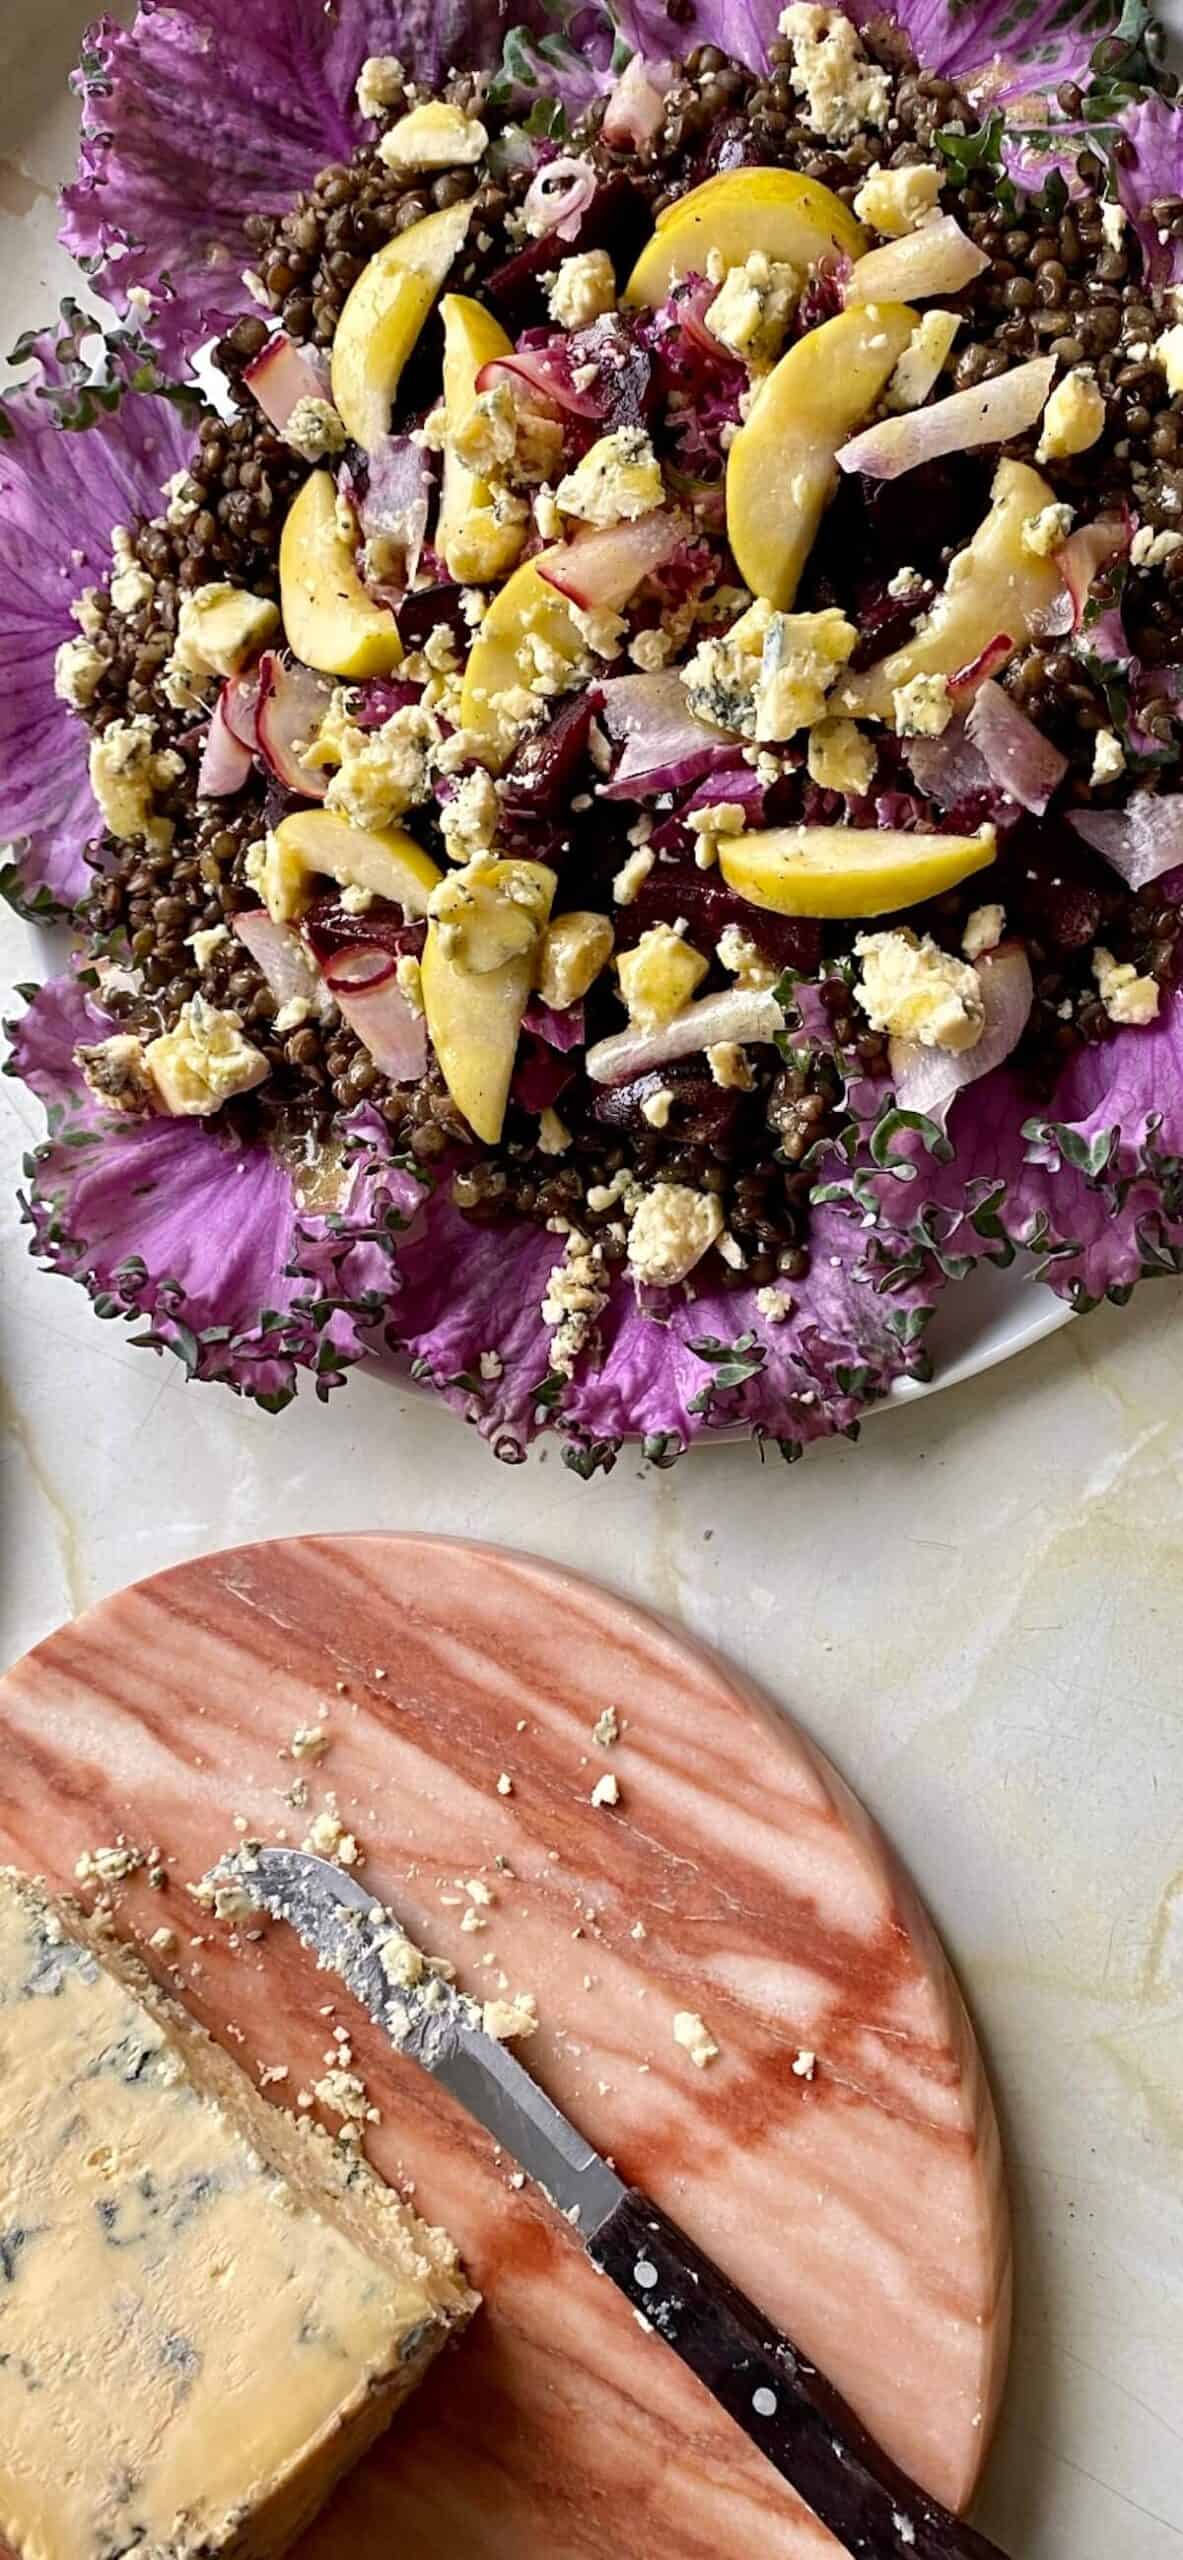 Serve the purple kale salad with blue cheese crumbled over the top 